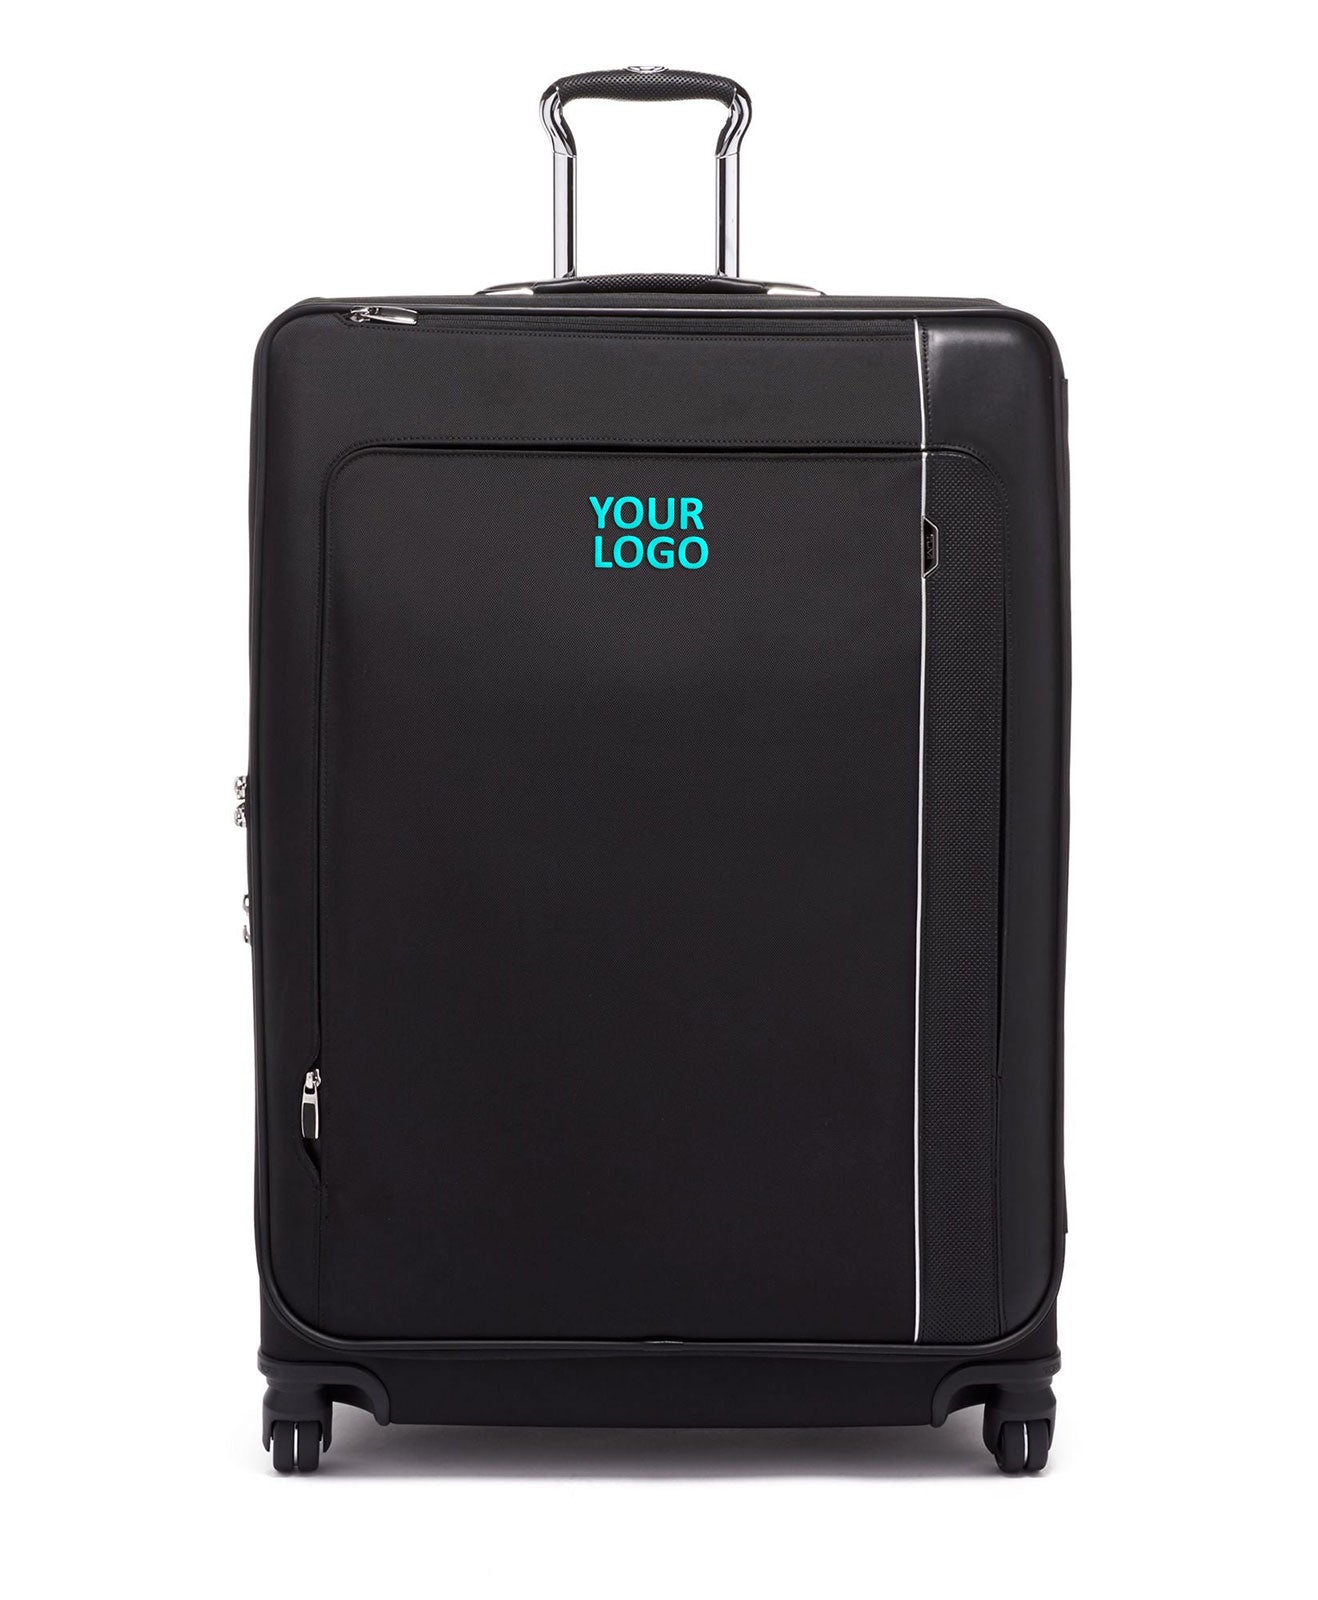 Tumi Extended Trip Dual Access 4 Wheeled Packing Case Black 1171801041